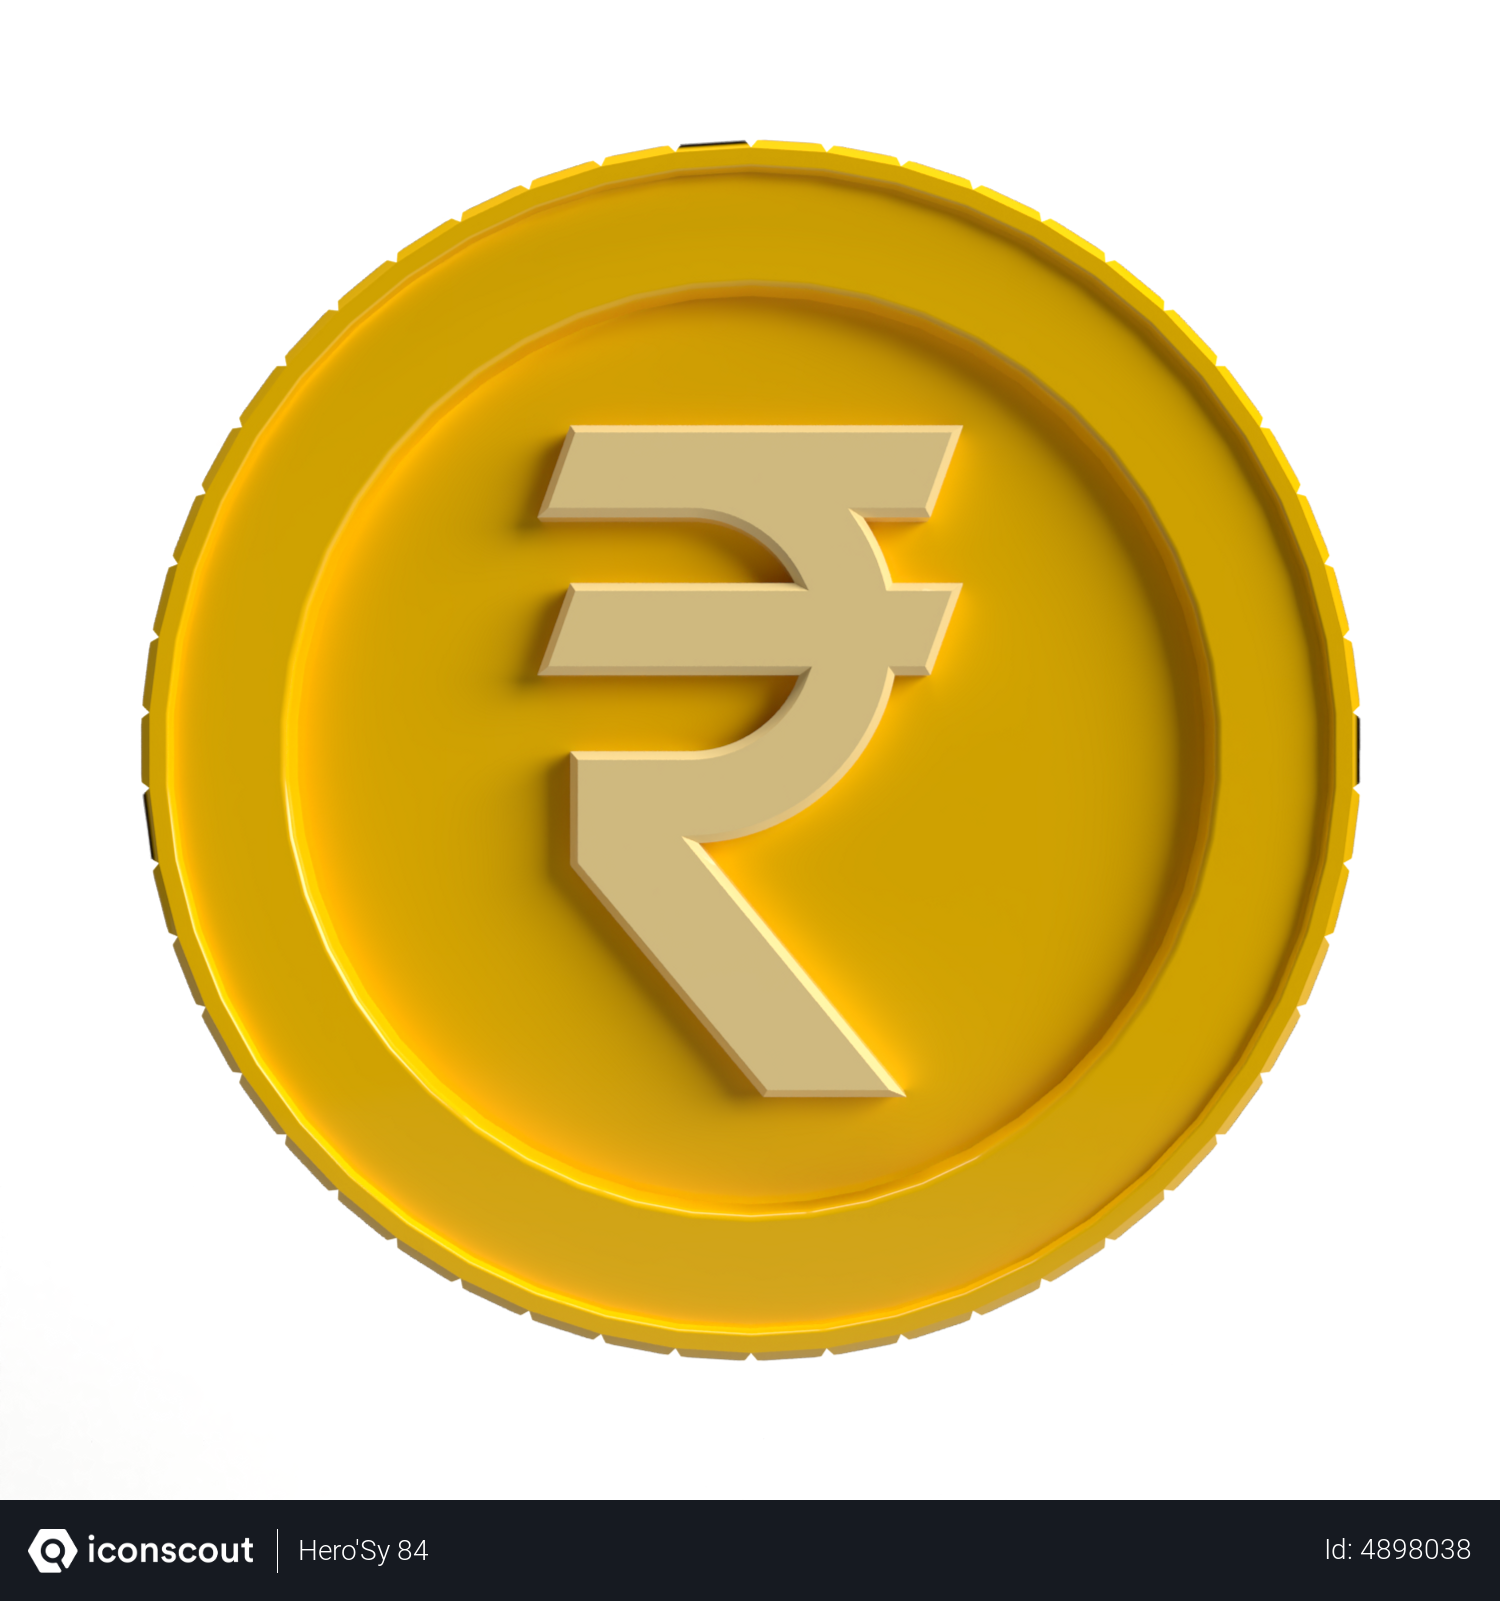 File:Indian rupee in sharp solid style.svg - Wikimedia Commons